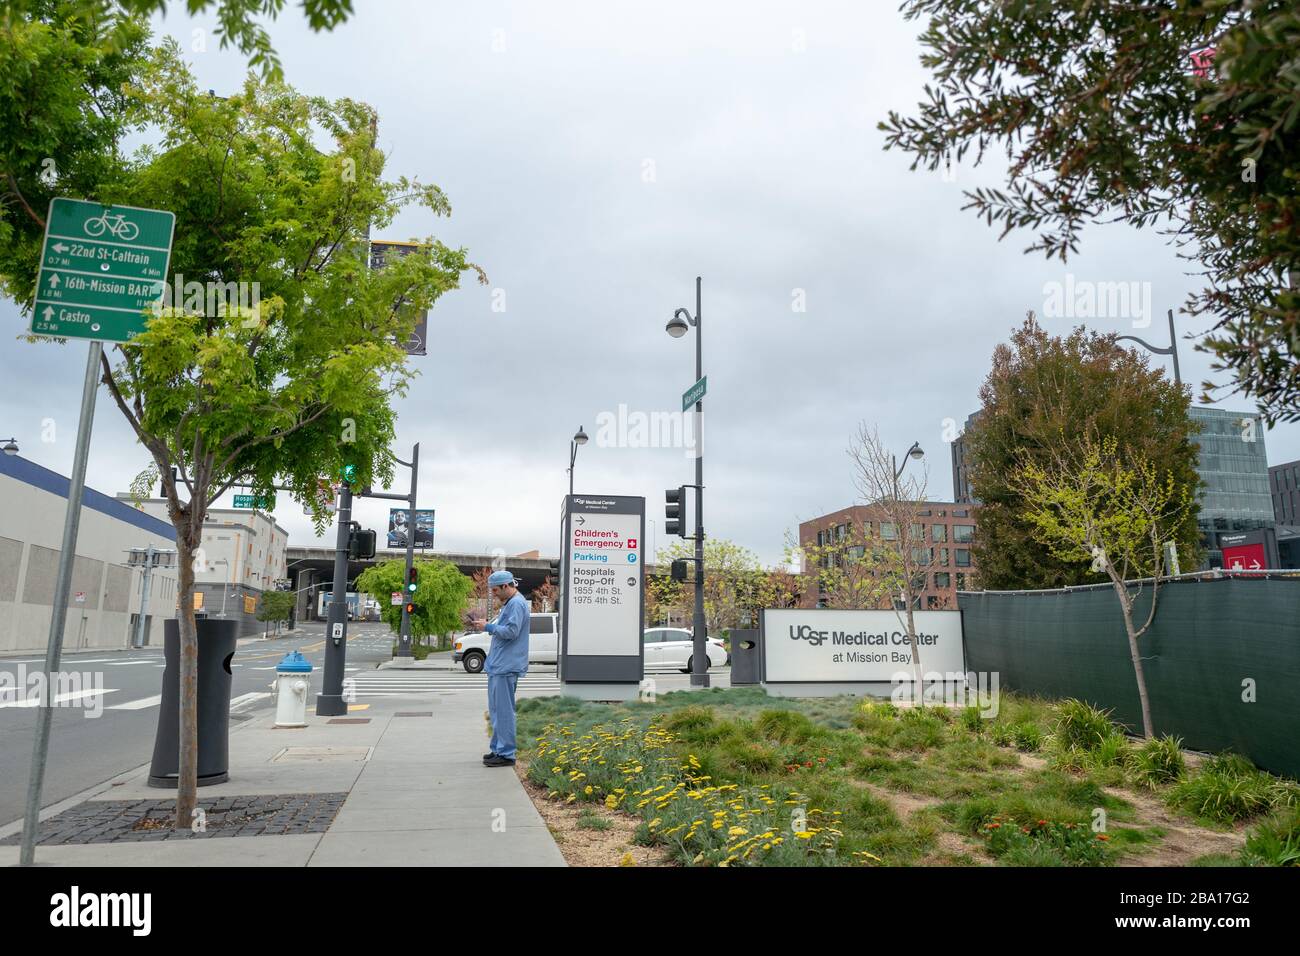 A medical provider in scrubs stands near a sign outside the University of California San Francisco (UCSF) medical center in Mission Bay during an outbreak of the COVID-19 coronavirus in San Francisco, California, March 23, 2020. () Stock Photo